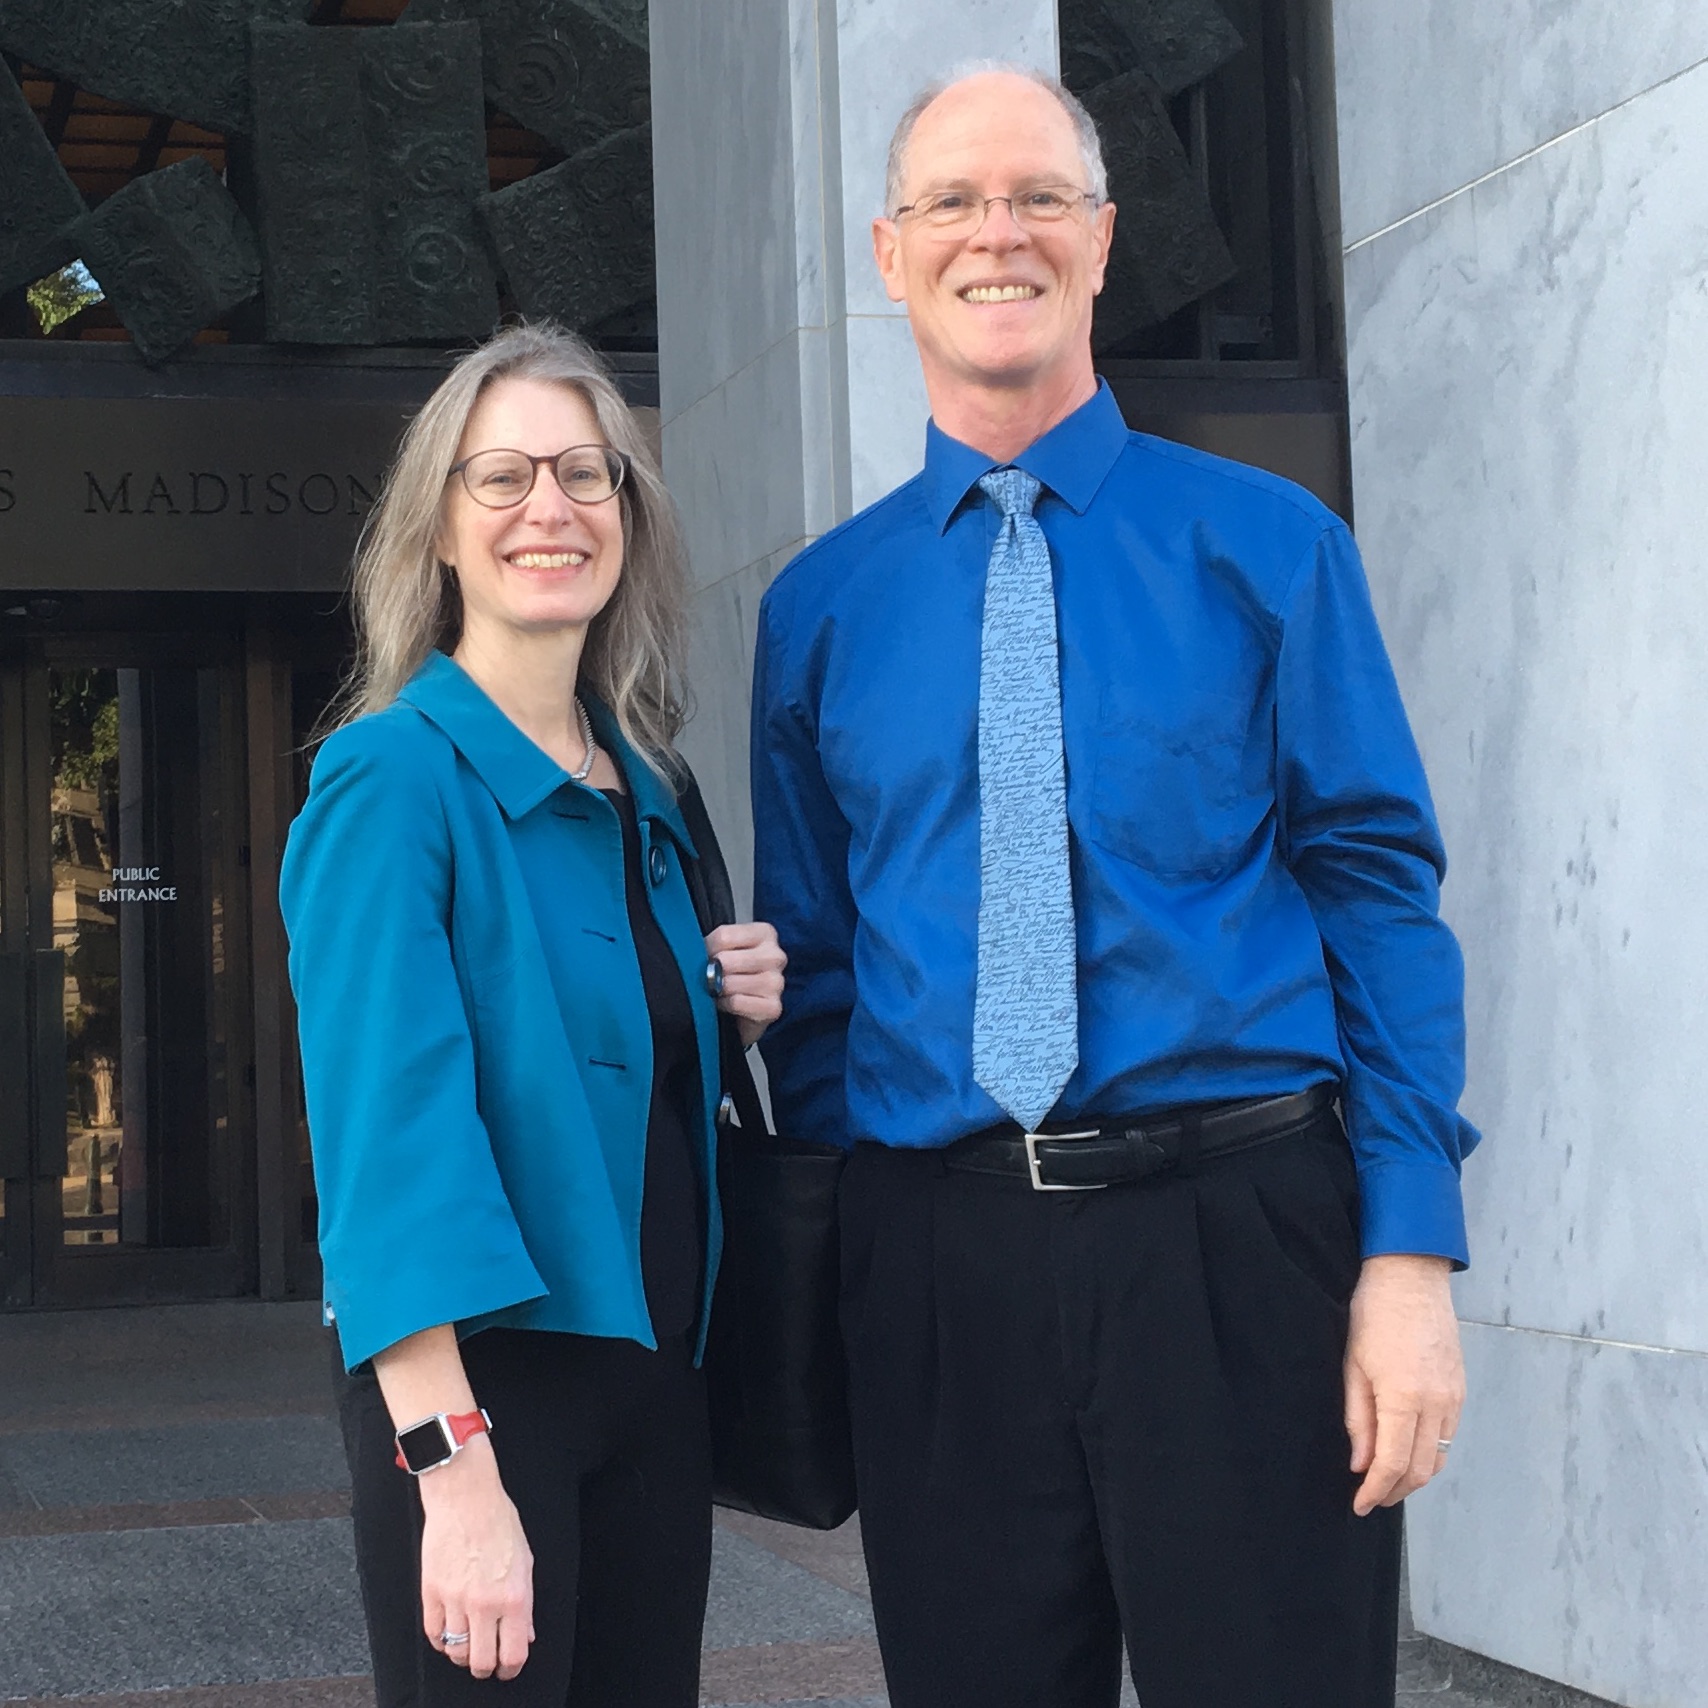 Alison Noyes and Rich Cairn smile as they stand in front of Madison Building of the Library of Congress.